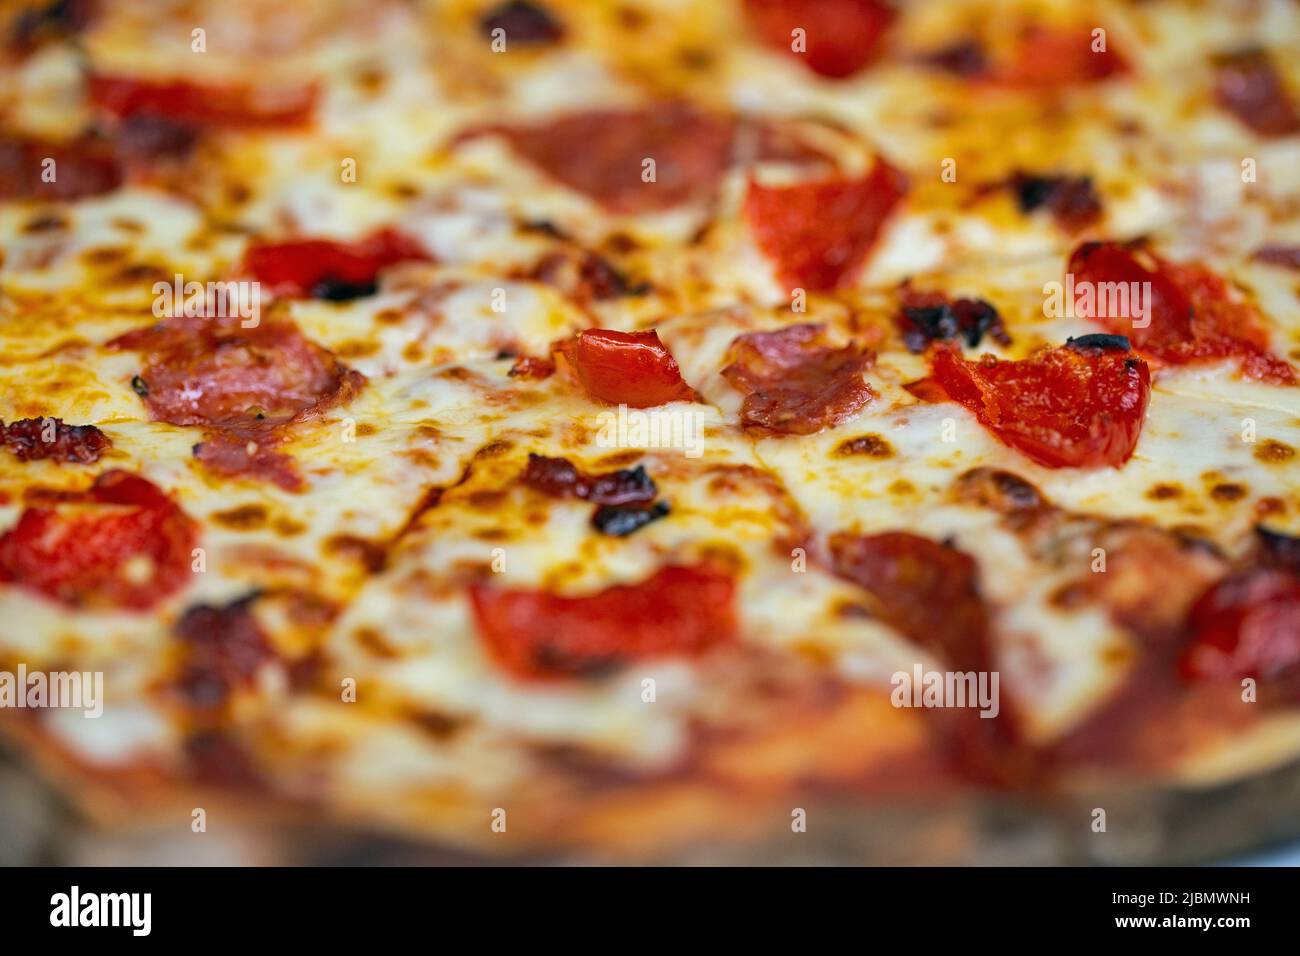 Pizza with mozzarella, and pepperoni, shot close up for use as a background. Stock Photo